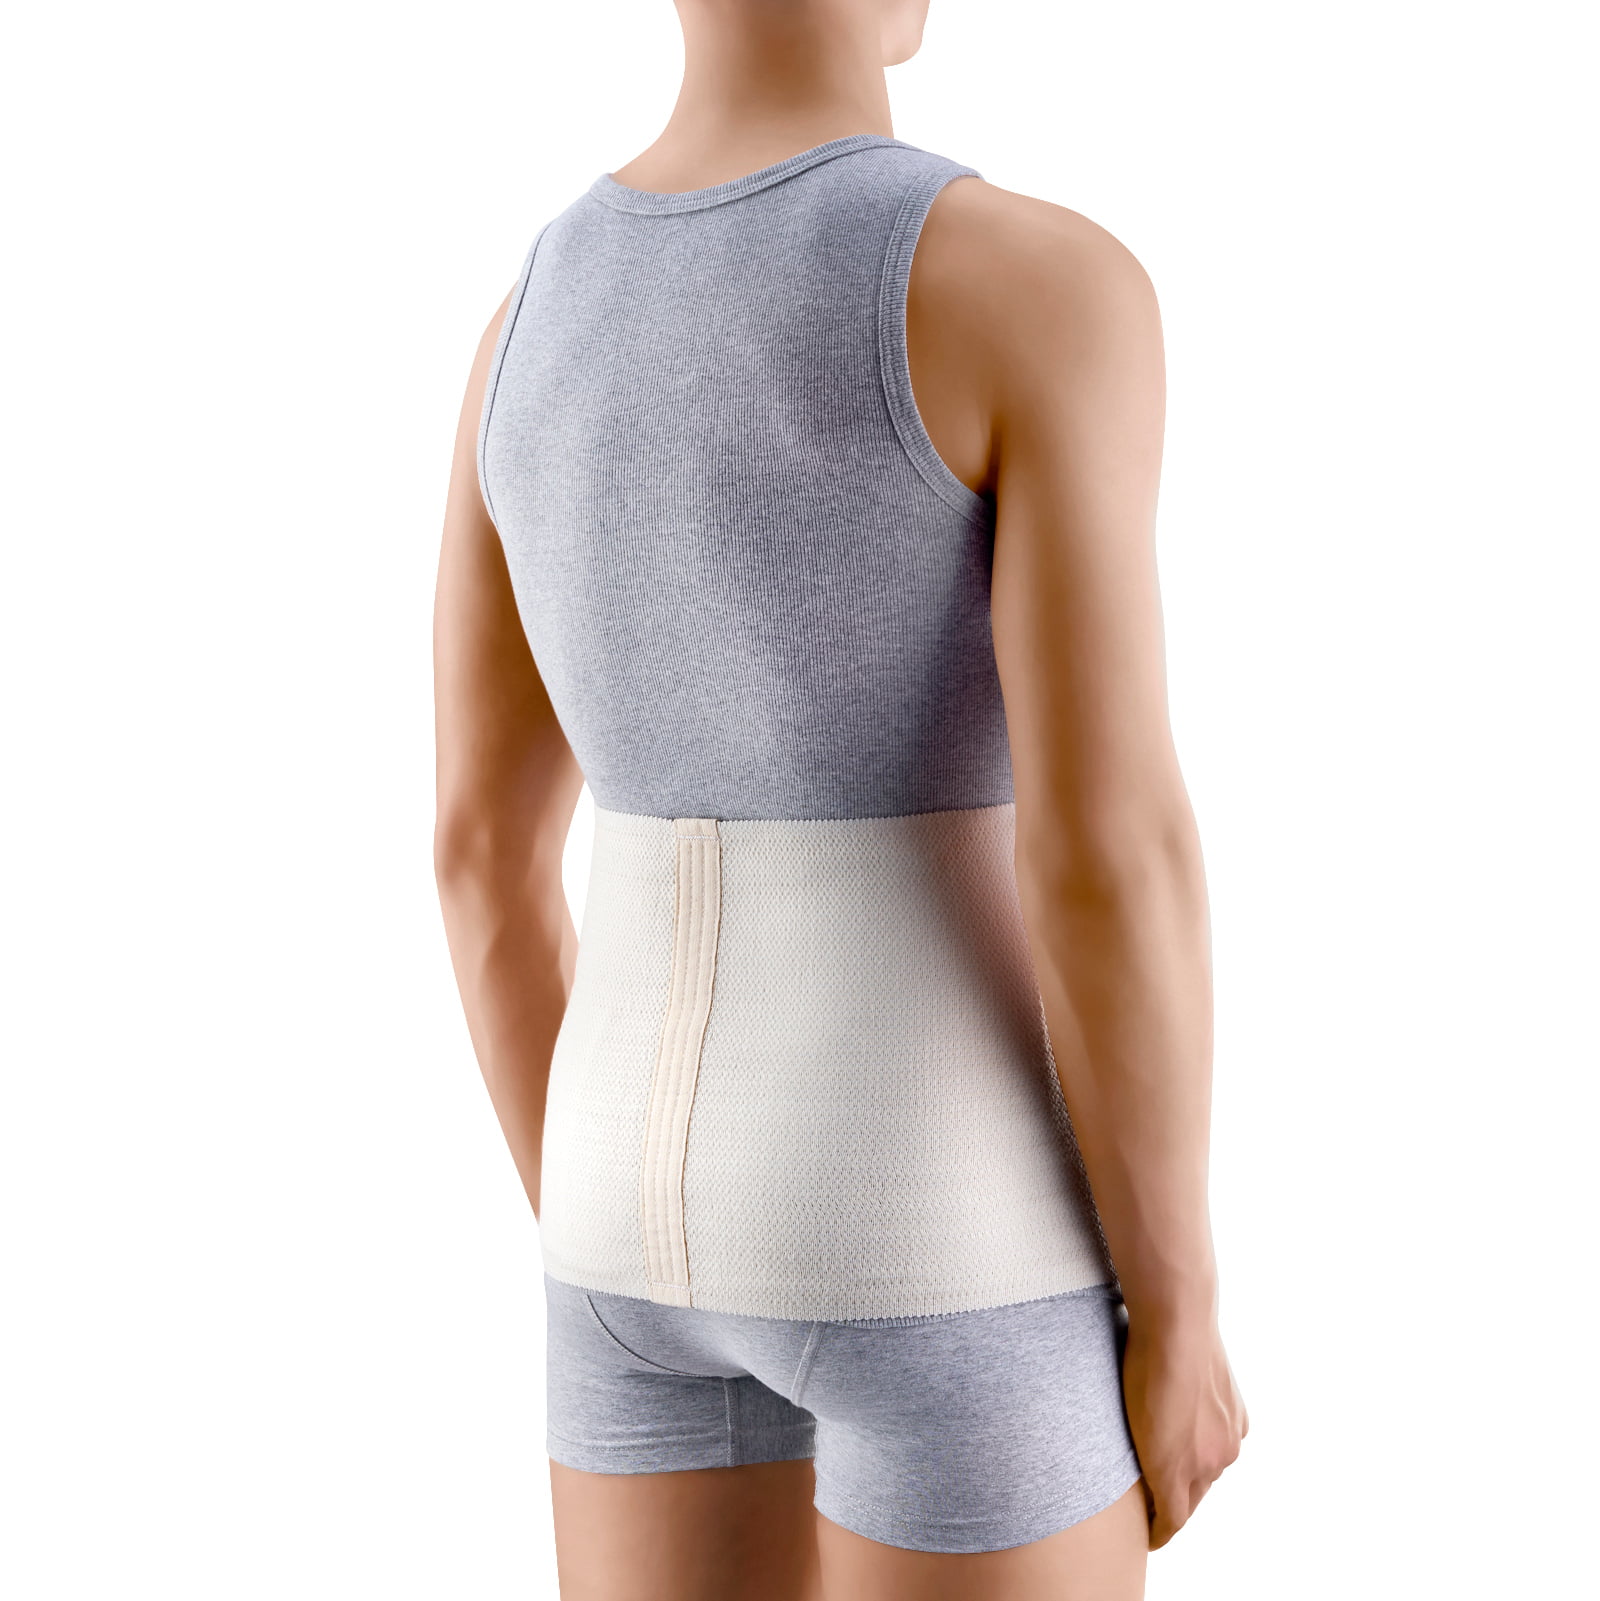 Warming Belt, Wool Thermal Brace for Treatment and Prevention of Back –  Assistica